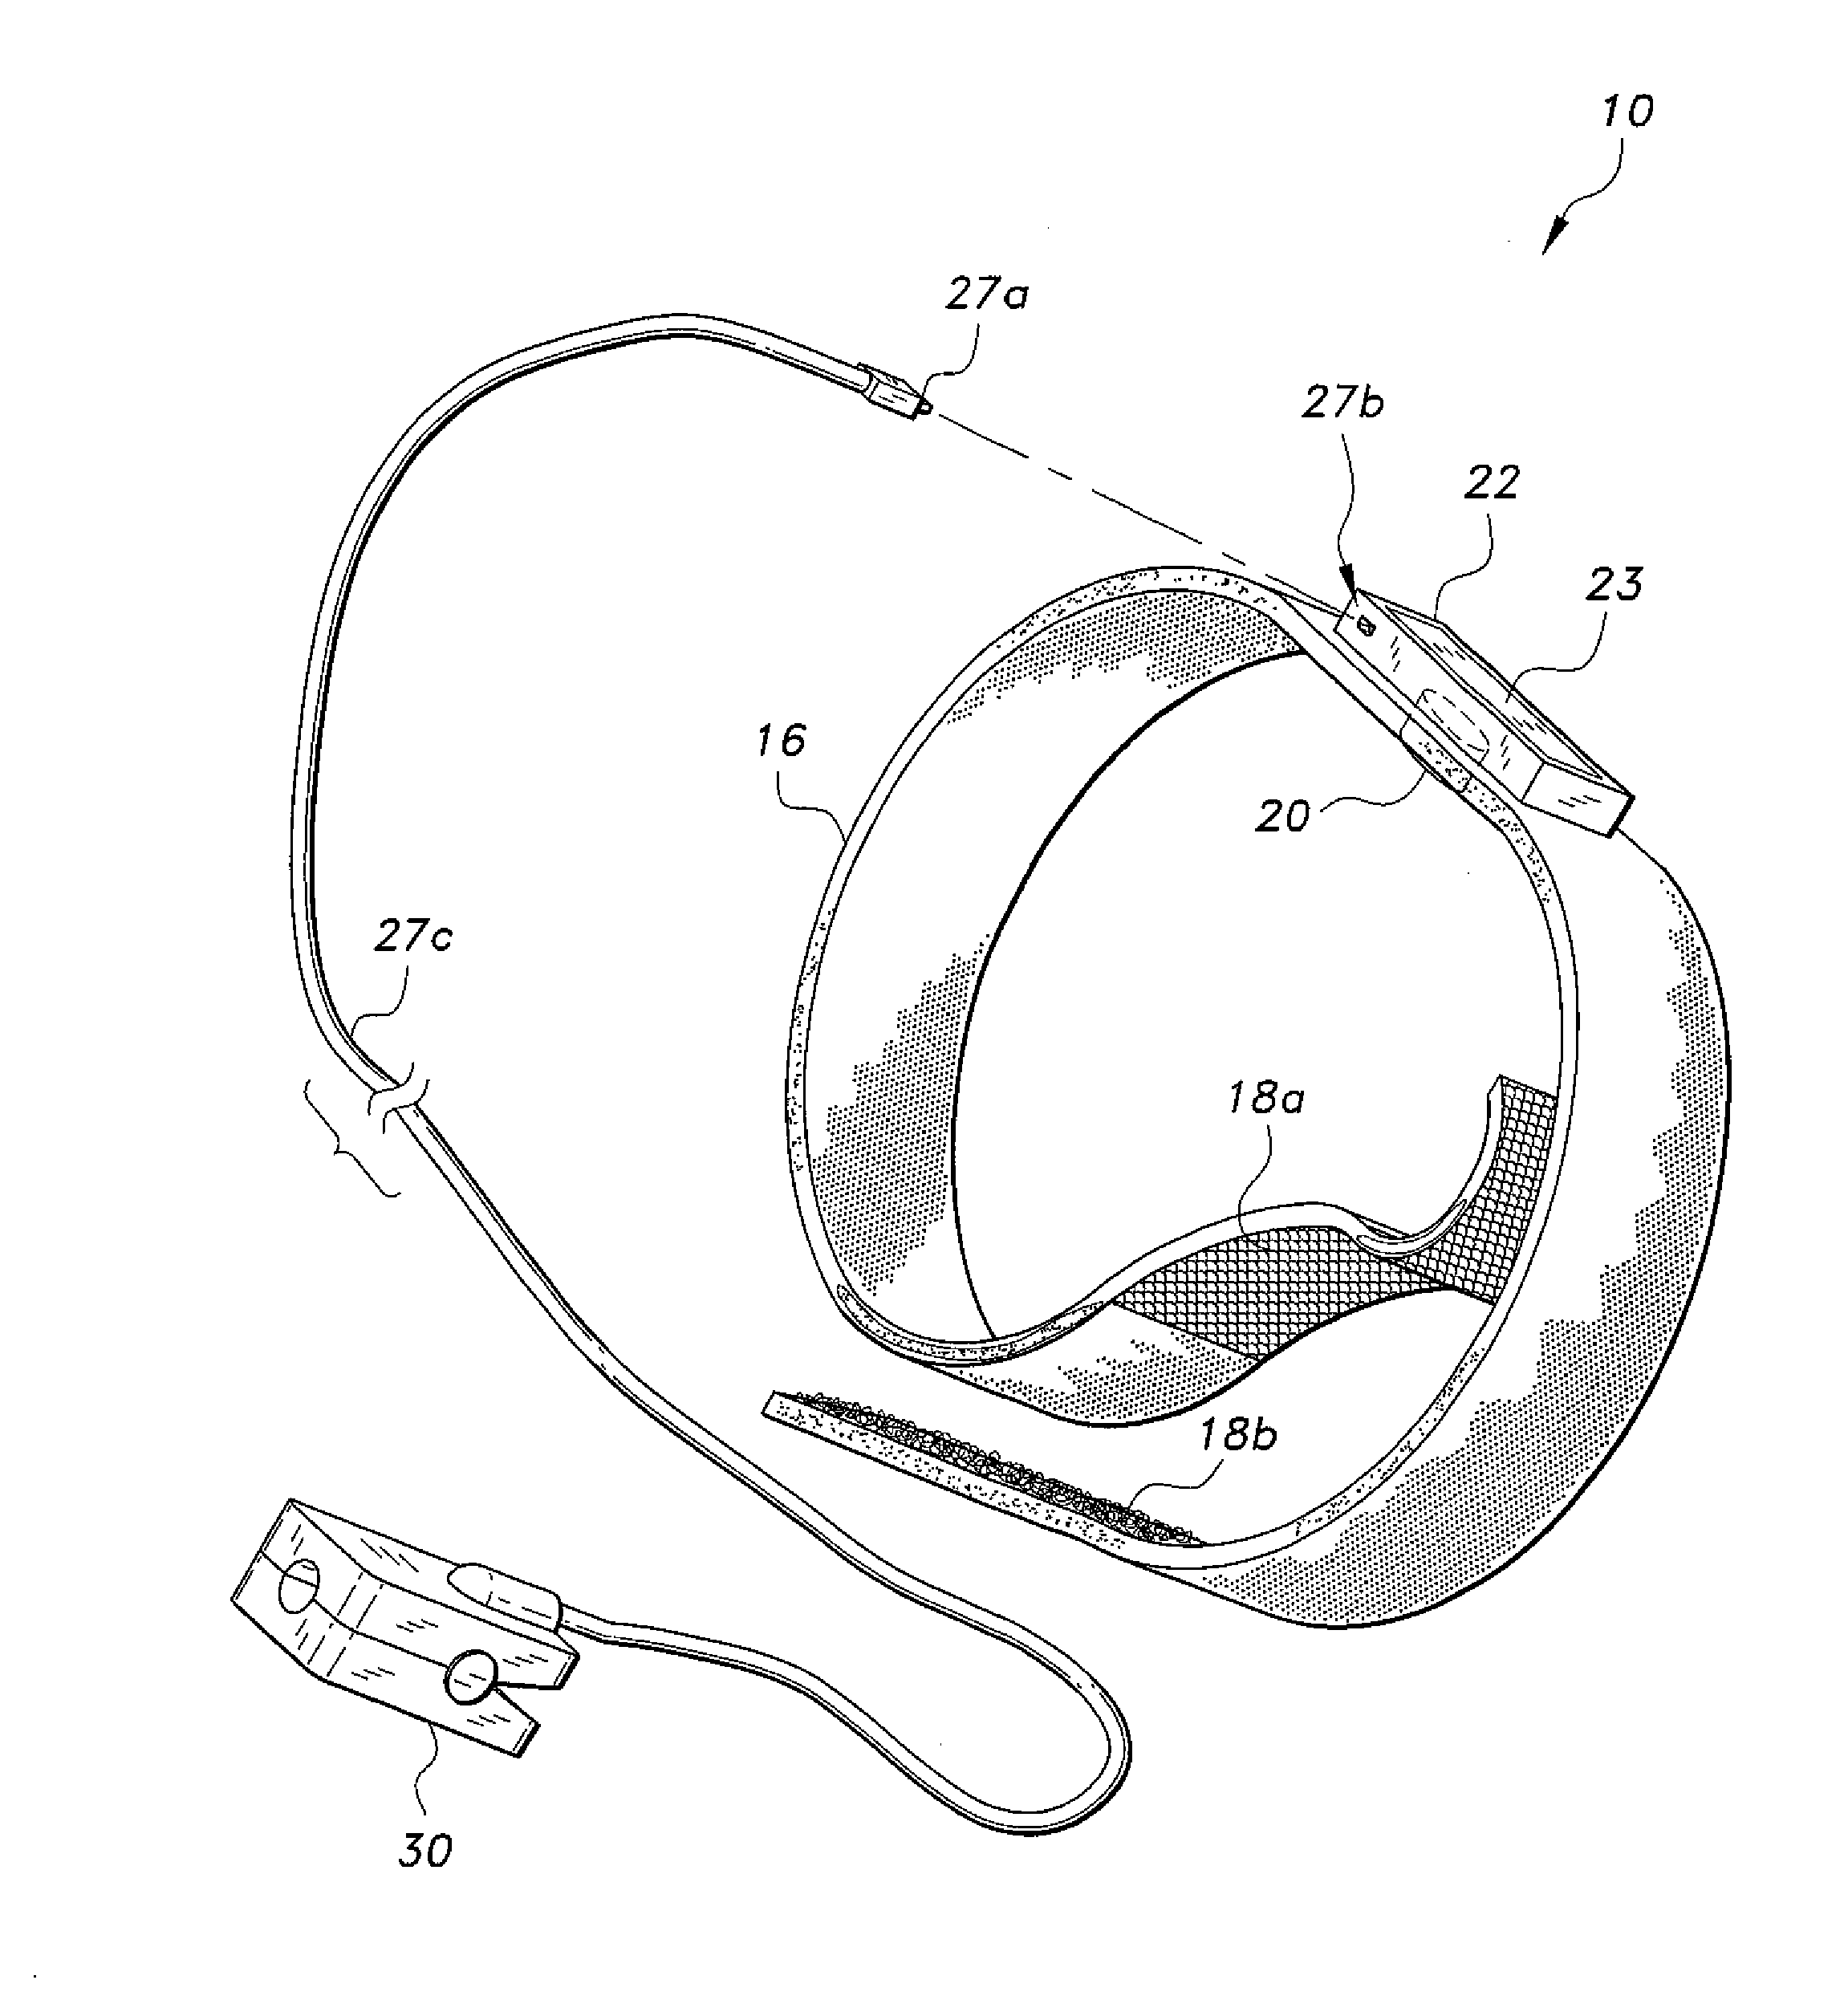 Wearable acoustic device for monitoring breathing sounds